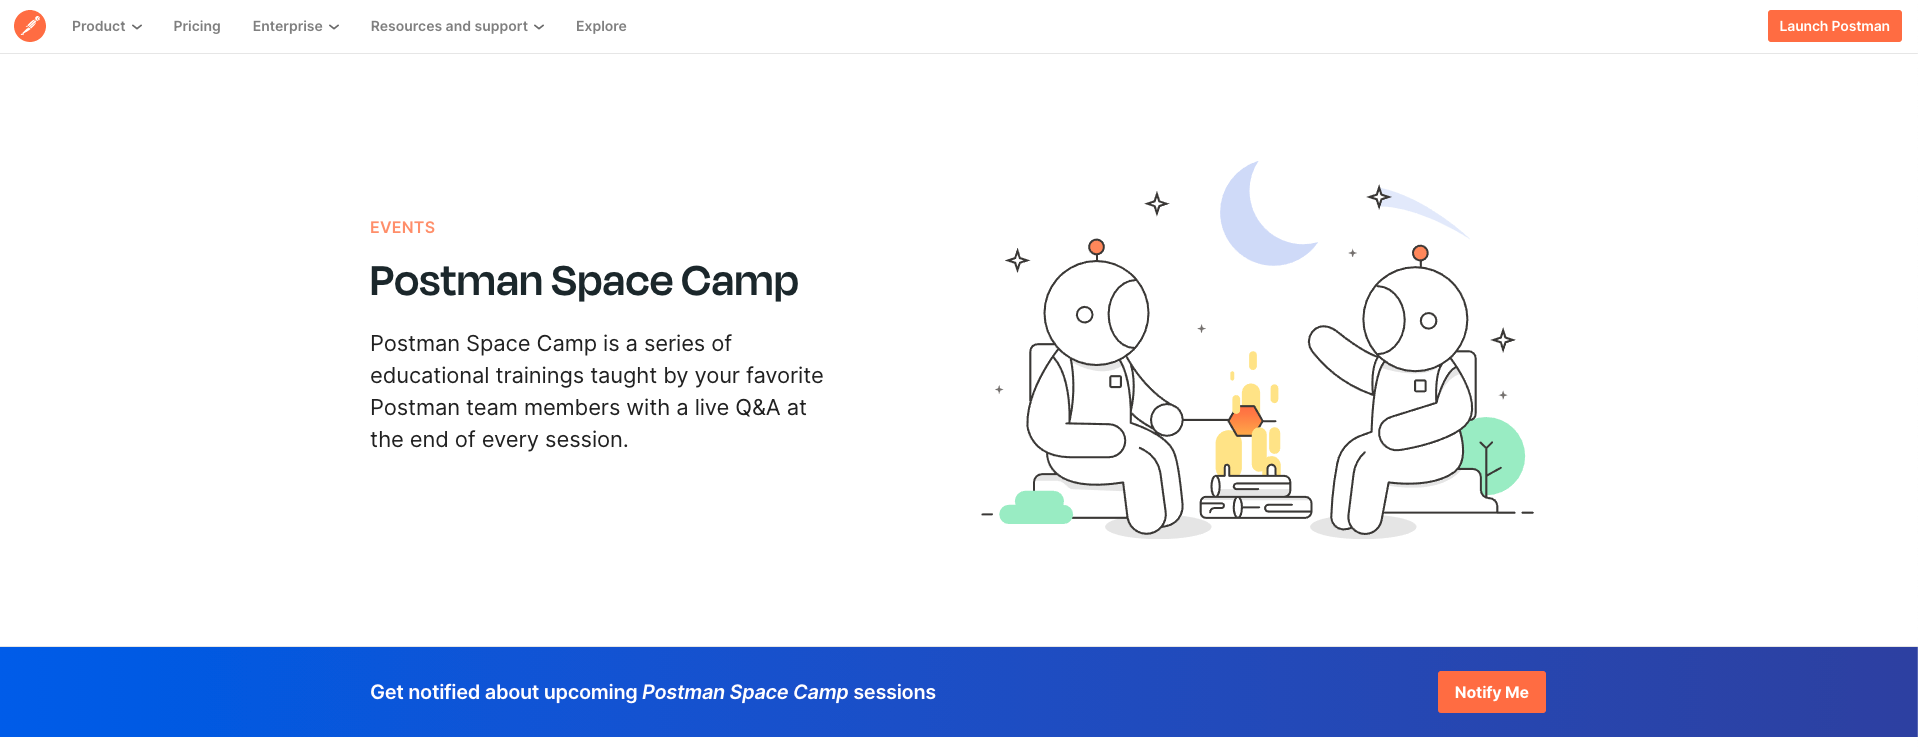 The Postman Intergalactic home page where you can register for future sessions